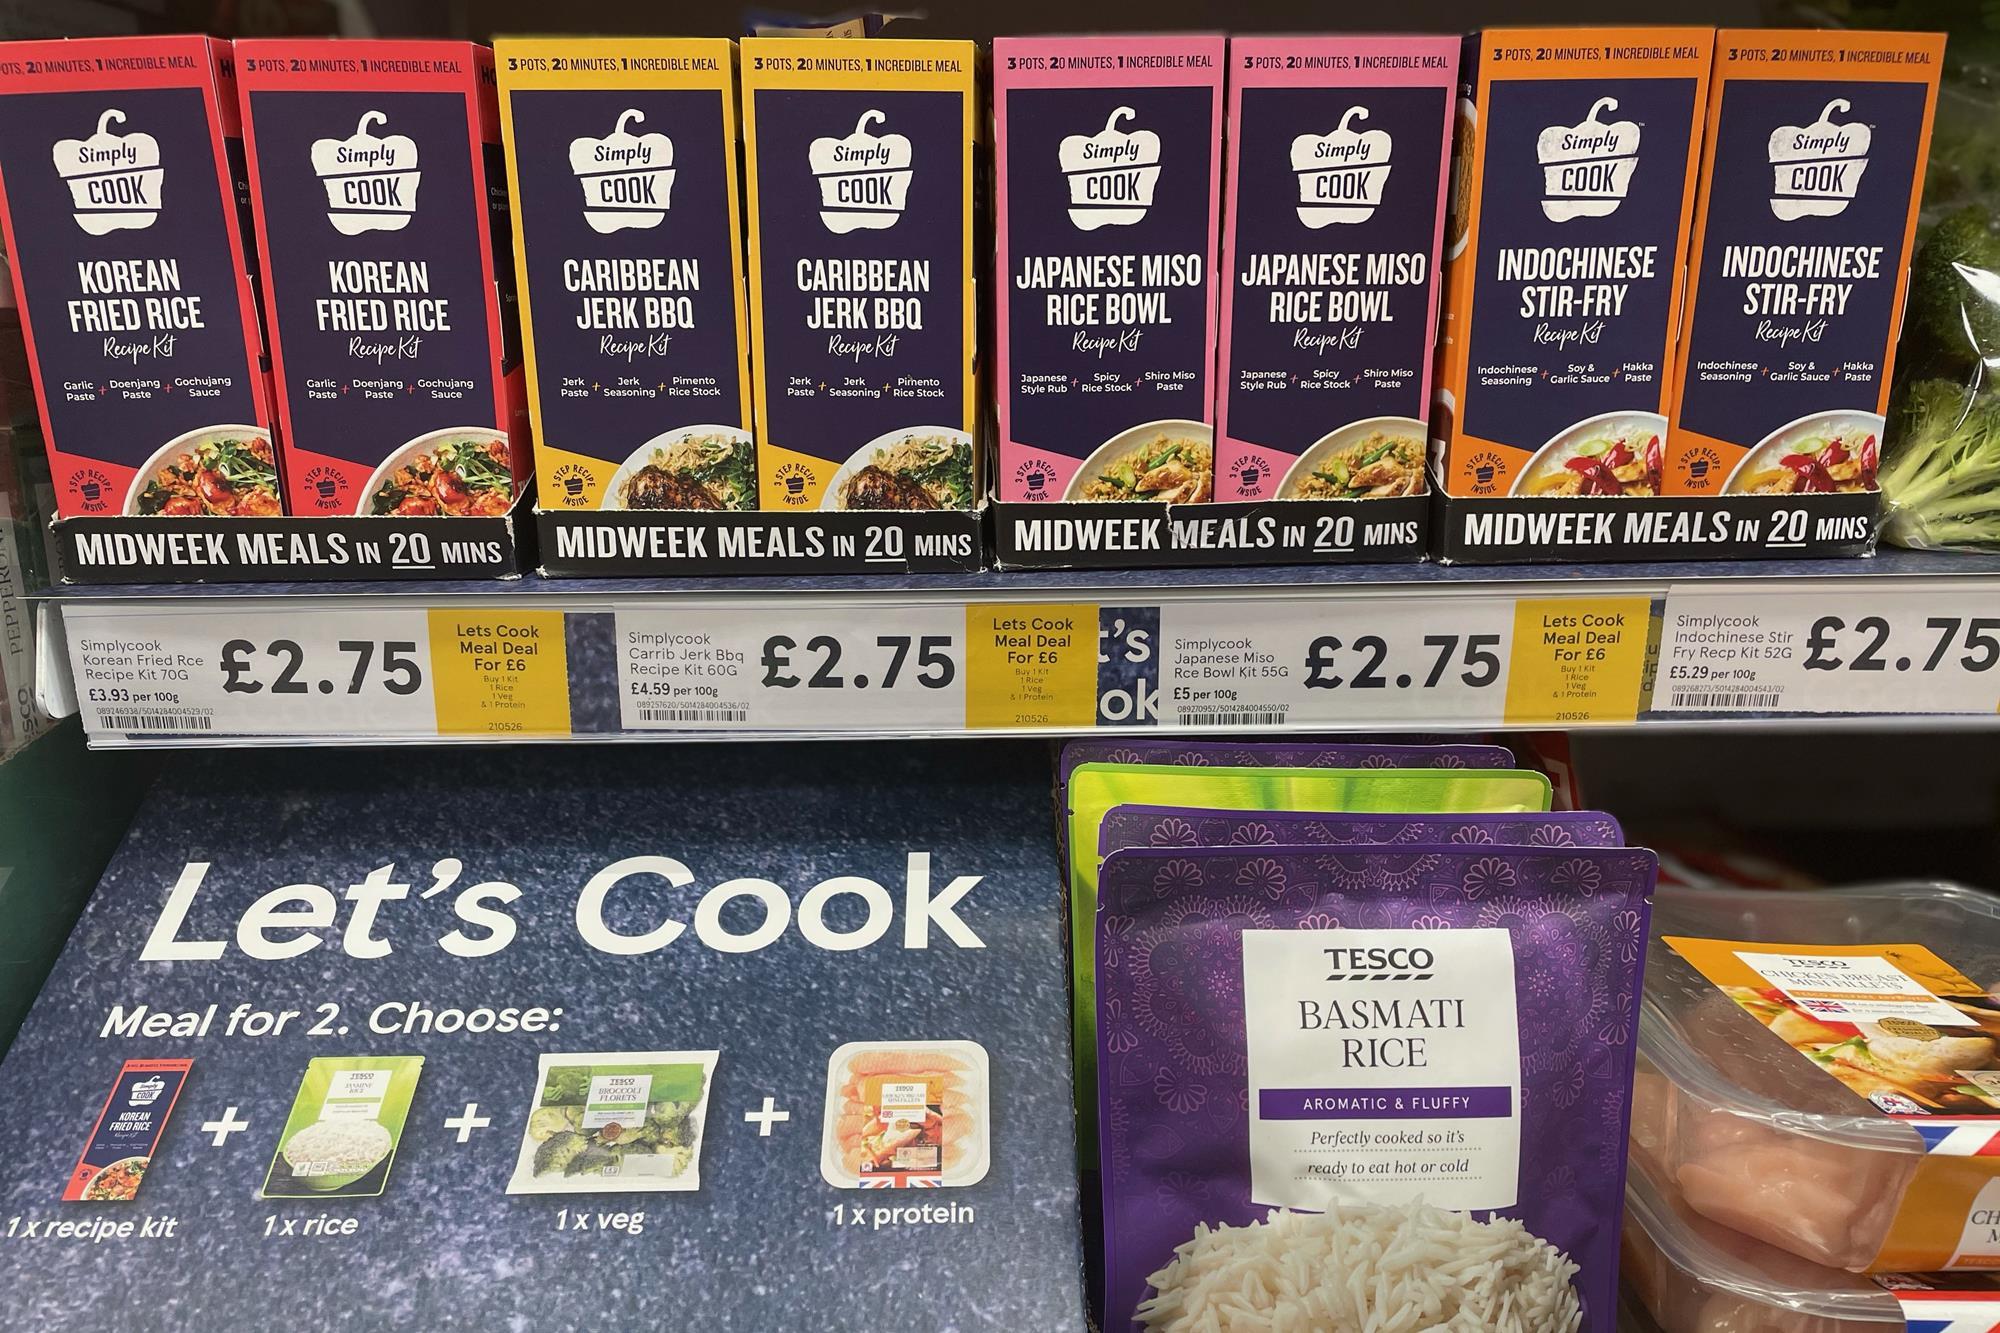 Tesco links with SimplyCook for 'Let's Cook' in-store meal kits